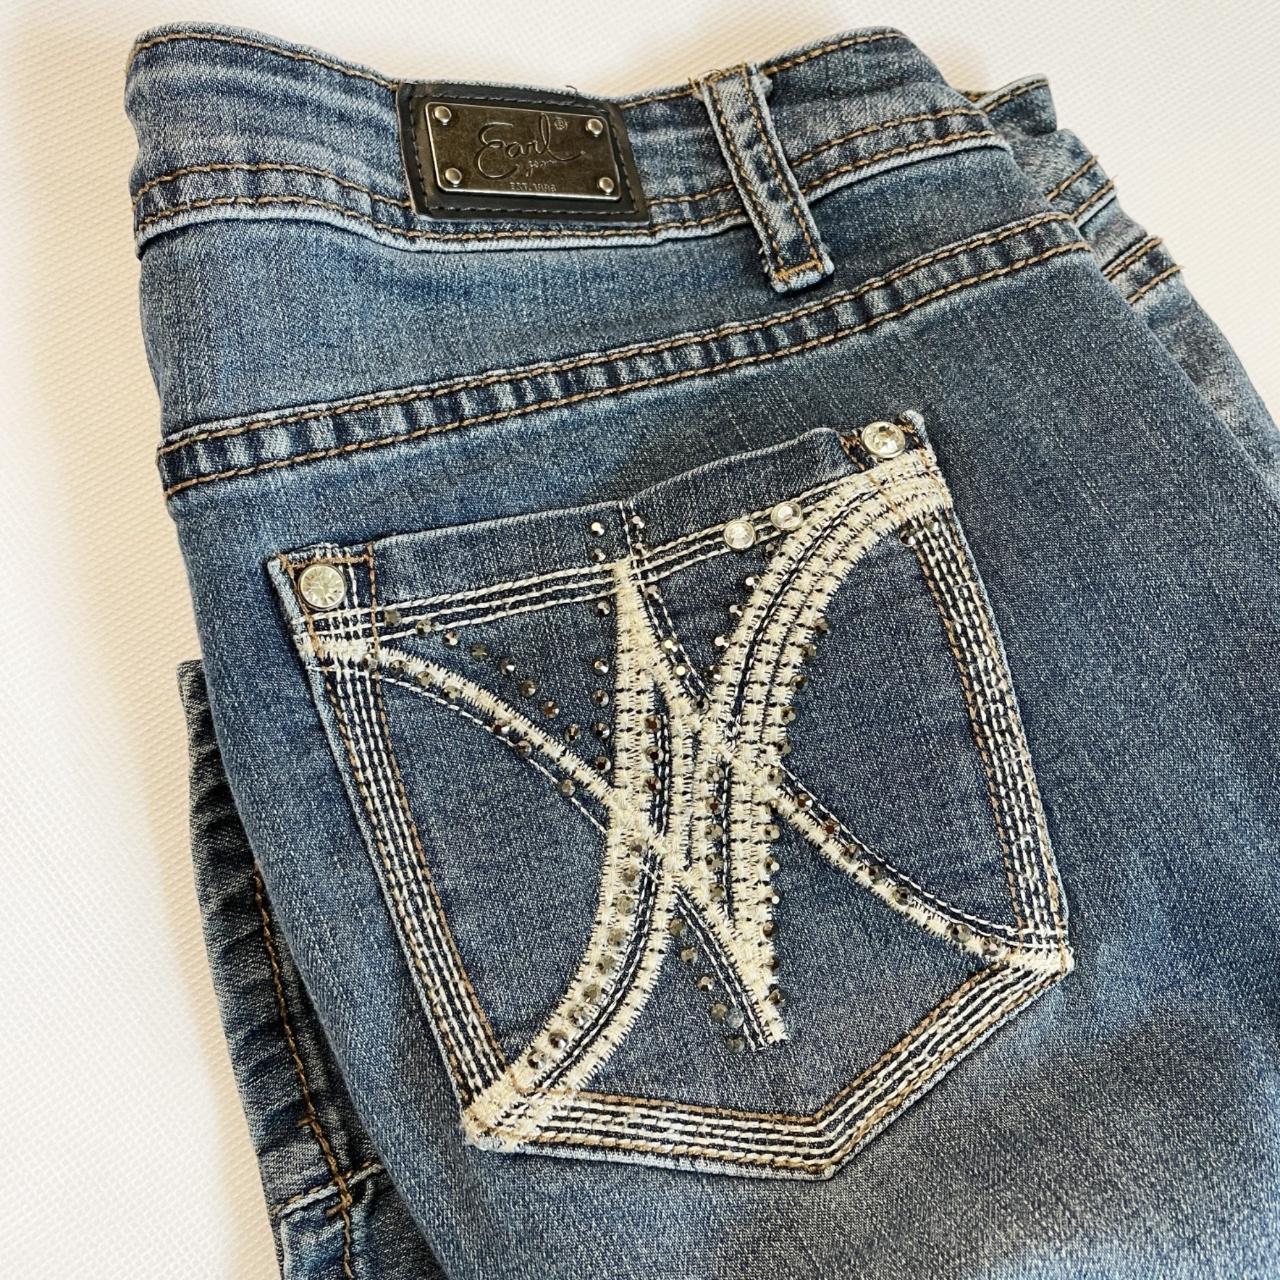 Earl Jeans embroidered skinny jeans size 12 there's - Depop